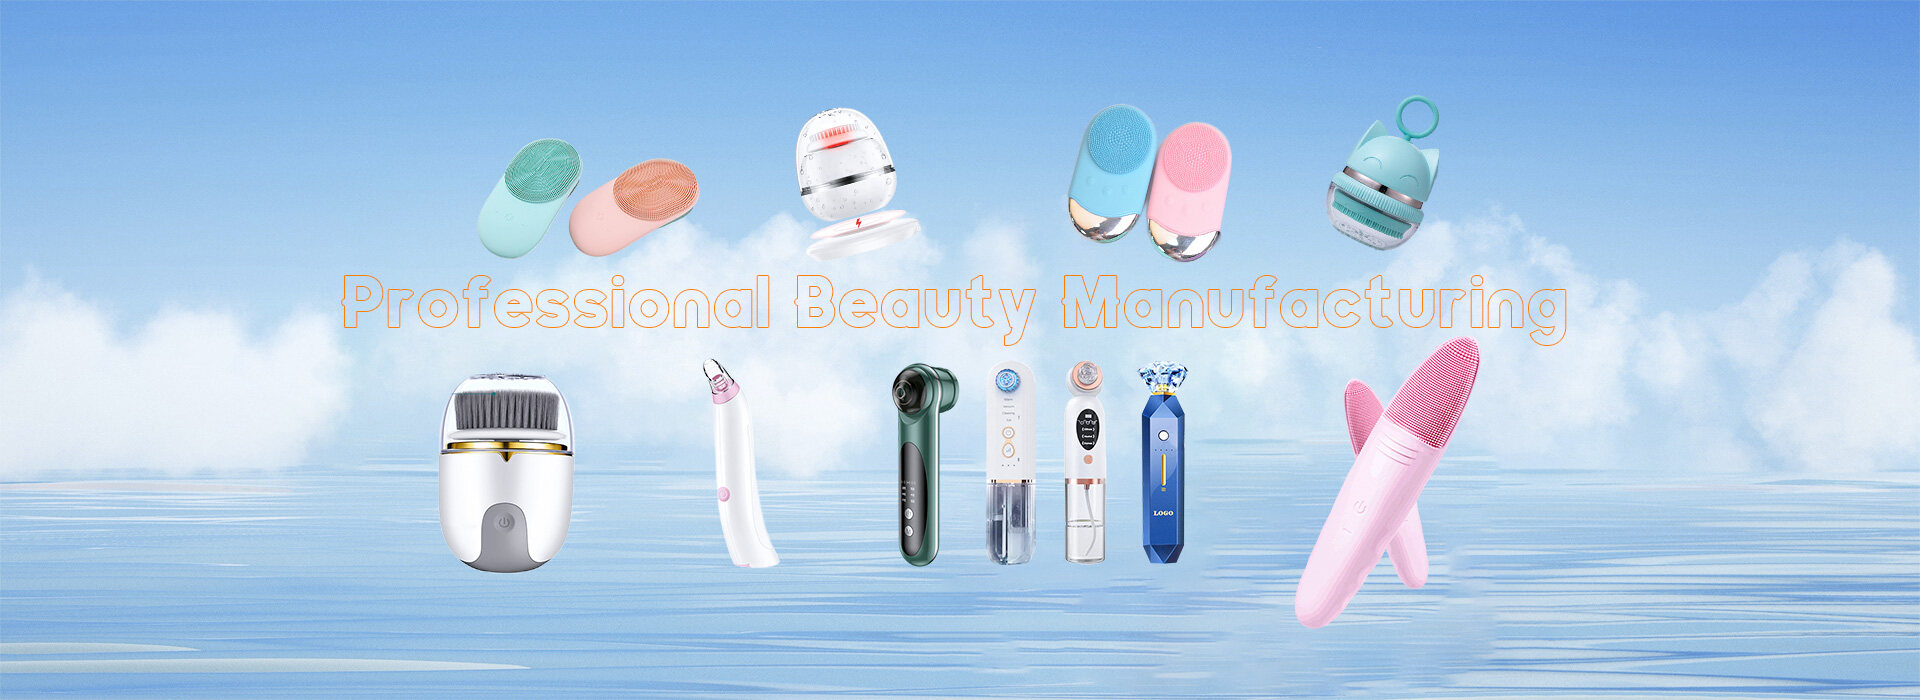 Portable Perfect Depiladora Epilator Ice Cool Painless Permanent IPL Laser Permanent Hair Removal Device Home Use,Beauty Products Hot Cold Red Blue Light Led EMS Facial Cleansing Massager Microcurrent Facial Toning Face Lifting Device,7 Color Light Anti Wrinkle Skin Rejuvenation Red Light Led Facial Equments With 850nm Red Light 660nm,Home Use Beautiful Professional Portable Facial Airbrush Oxygen Beauty Spray Machine,Face Lifting Neck Beauty RF Led EMS Device Skin Care Electric Anti-wrinkle Facial Neck Massage Machine